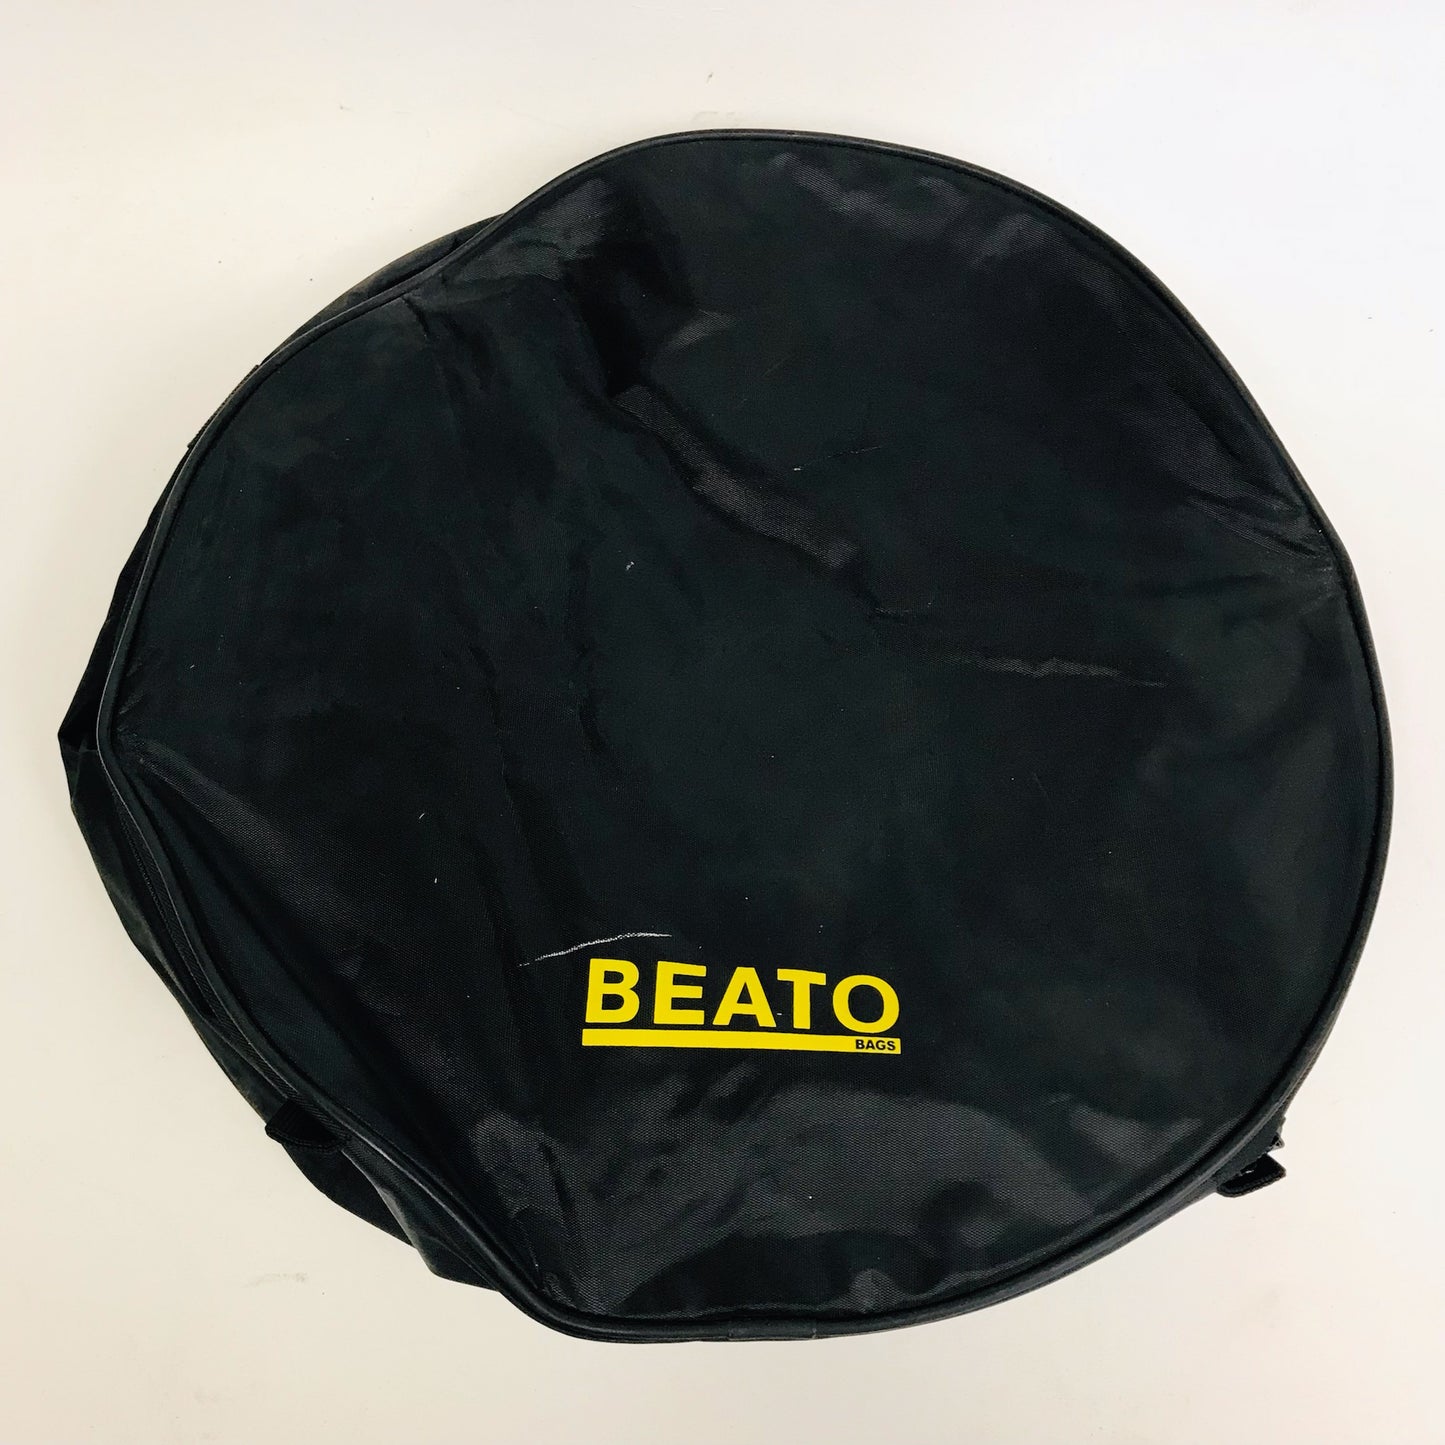 Protector Hard Case with Beato Snare Drum Bag 14”